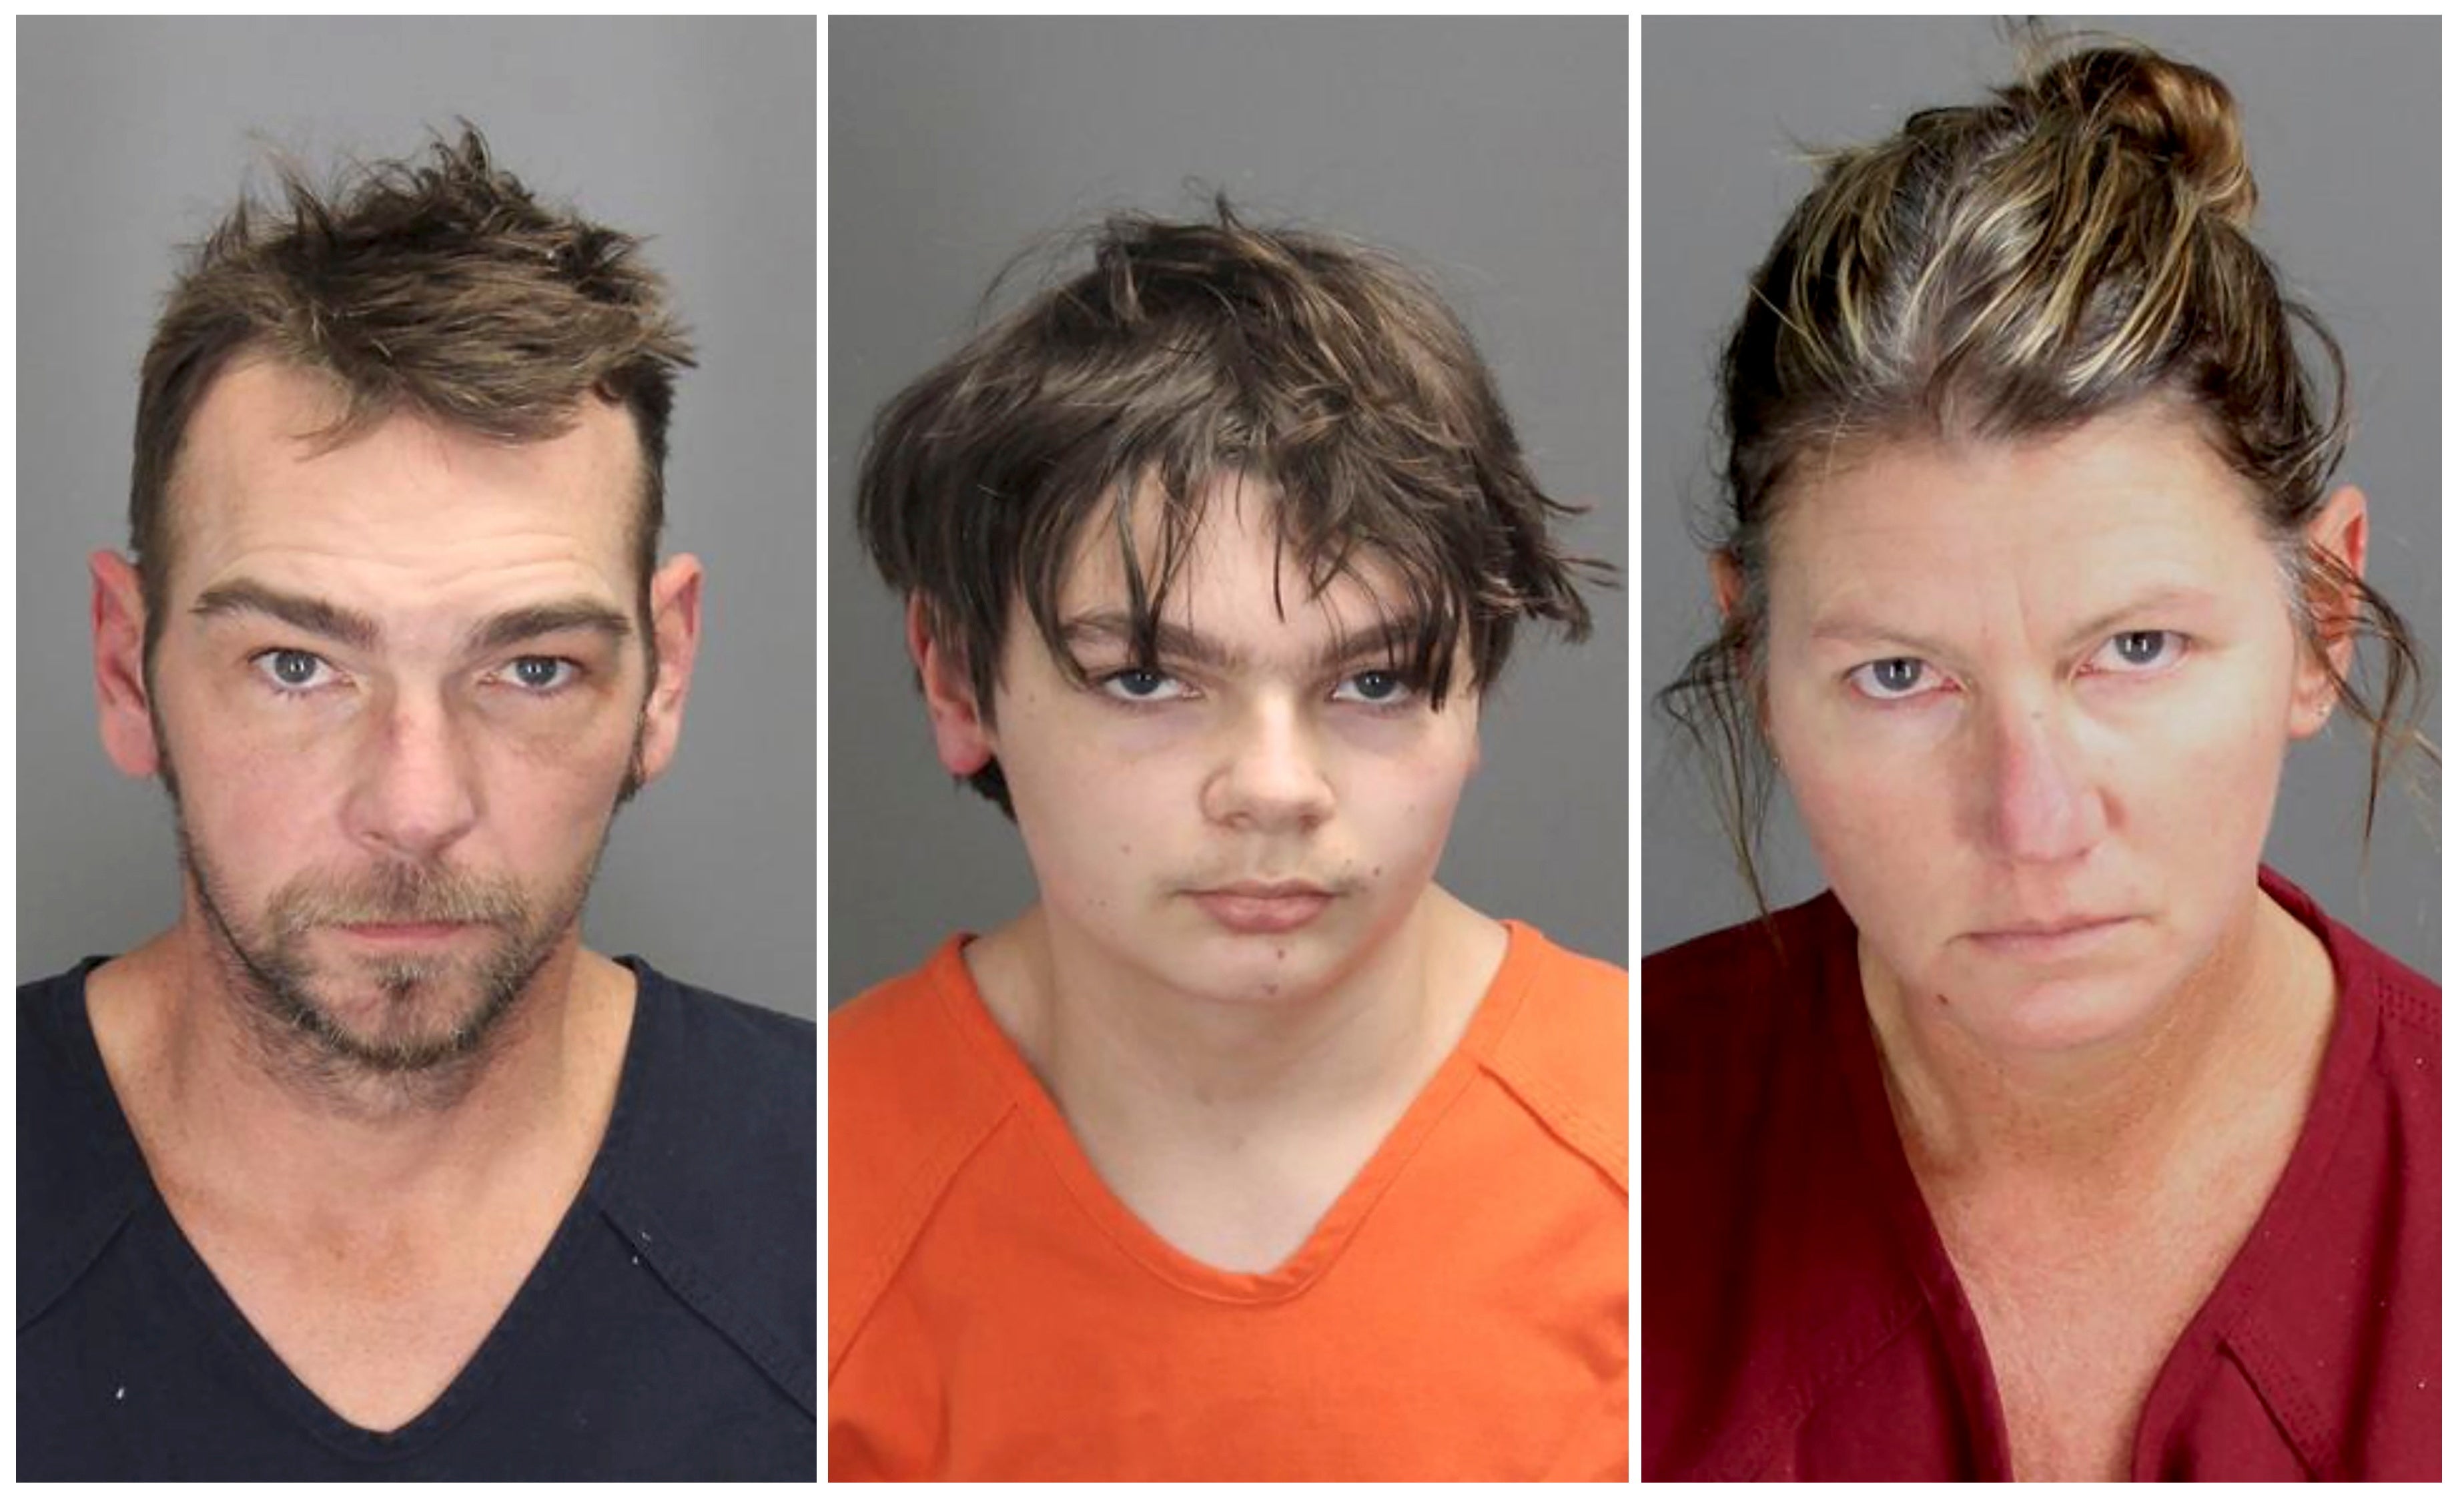 James, Ethan and Jennifer Crumbley pictured left to right in their booking photos